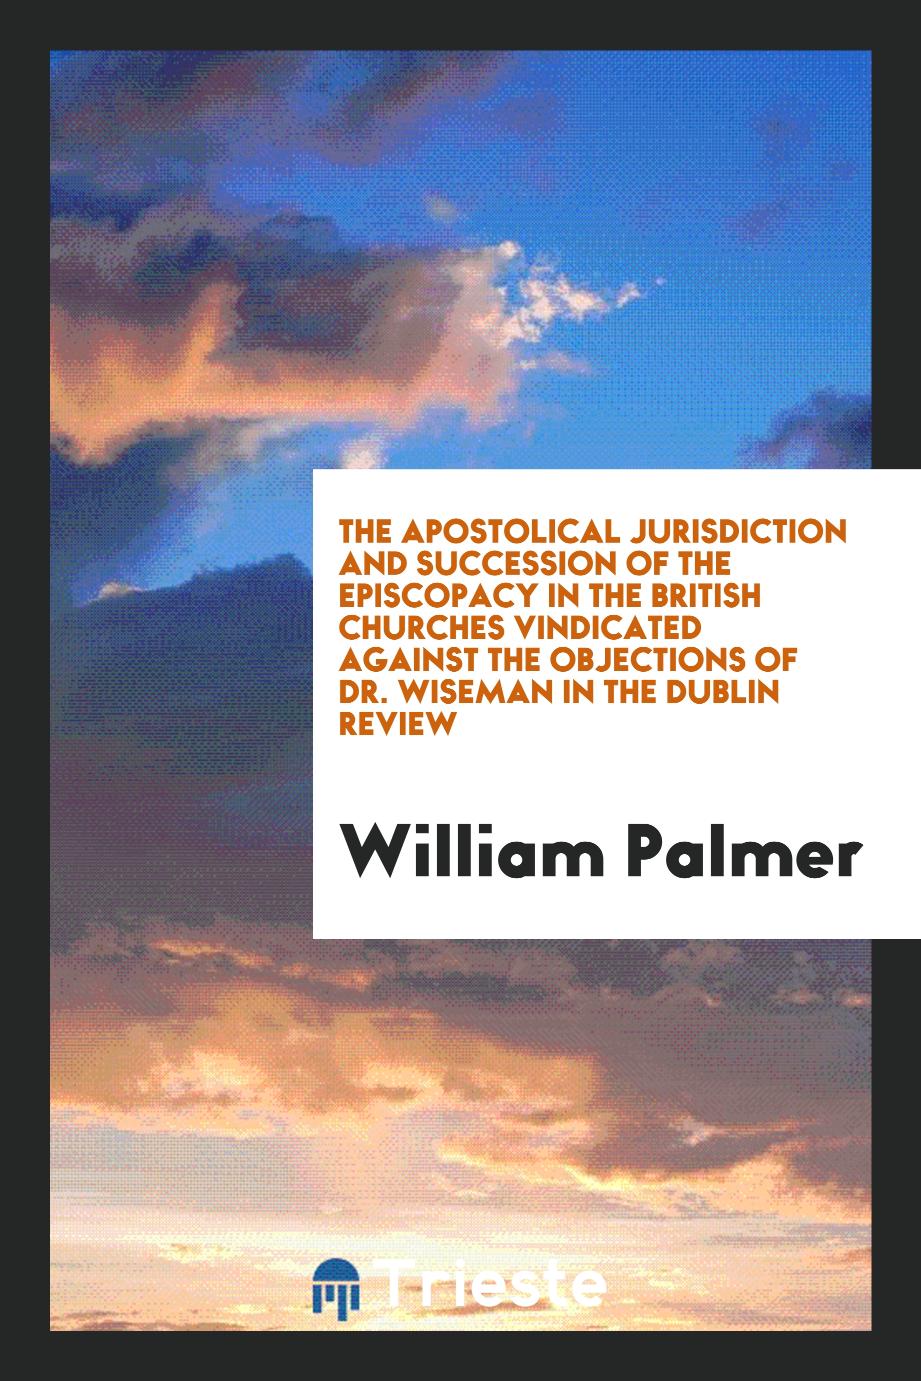 The Apostolical Jurisdiction and Succession of the Episcopacy in the British Churches Vindicated Against the Objections of Dr. Wiseman in the Dublin Review